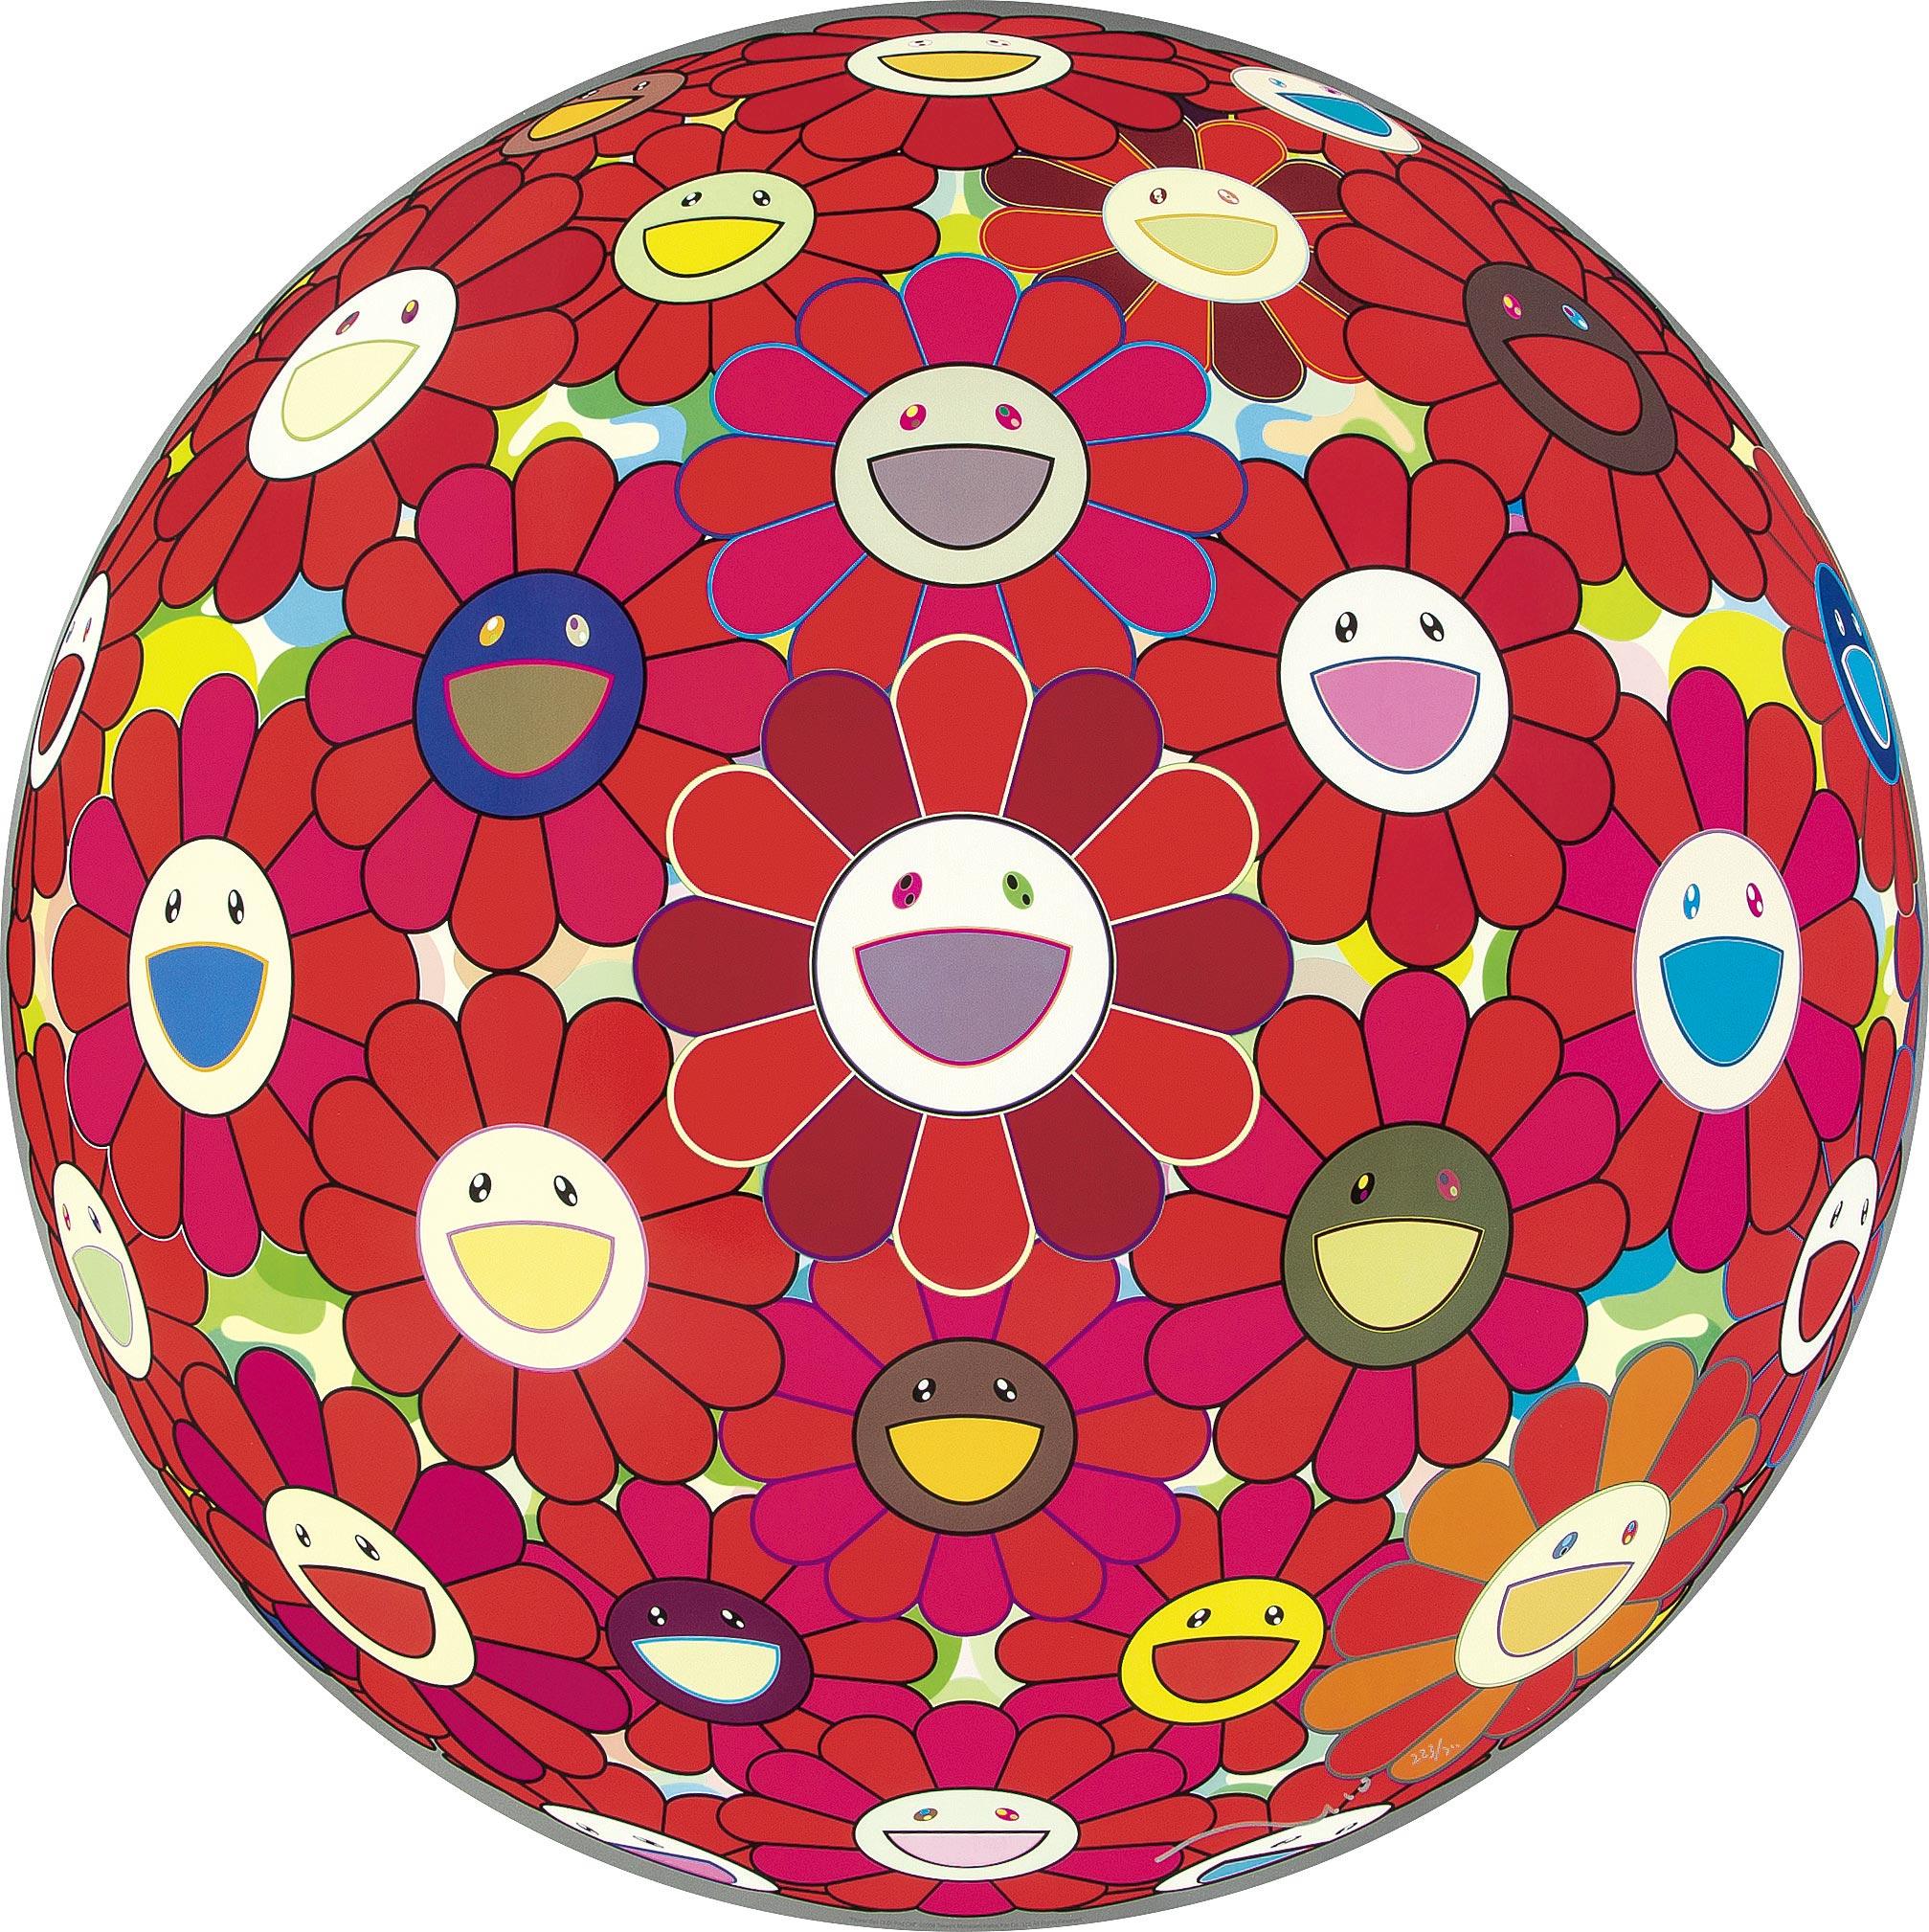 Takashi Murakami Figurative Print - Flower Ball (3-D) Red Cliff Limited Edition (print) by Murakami signed, numbered